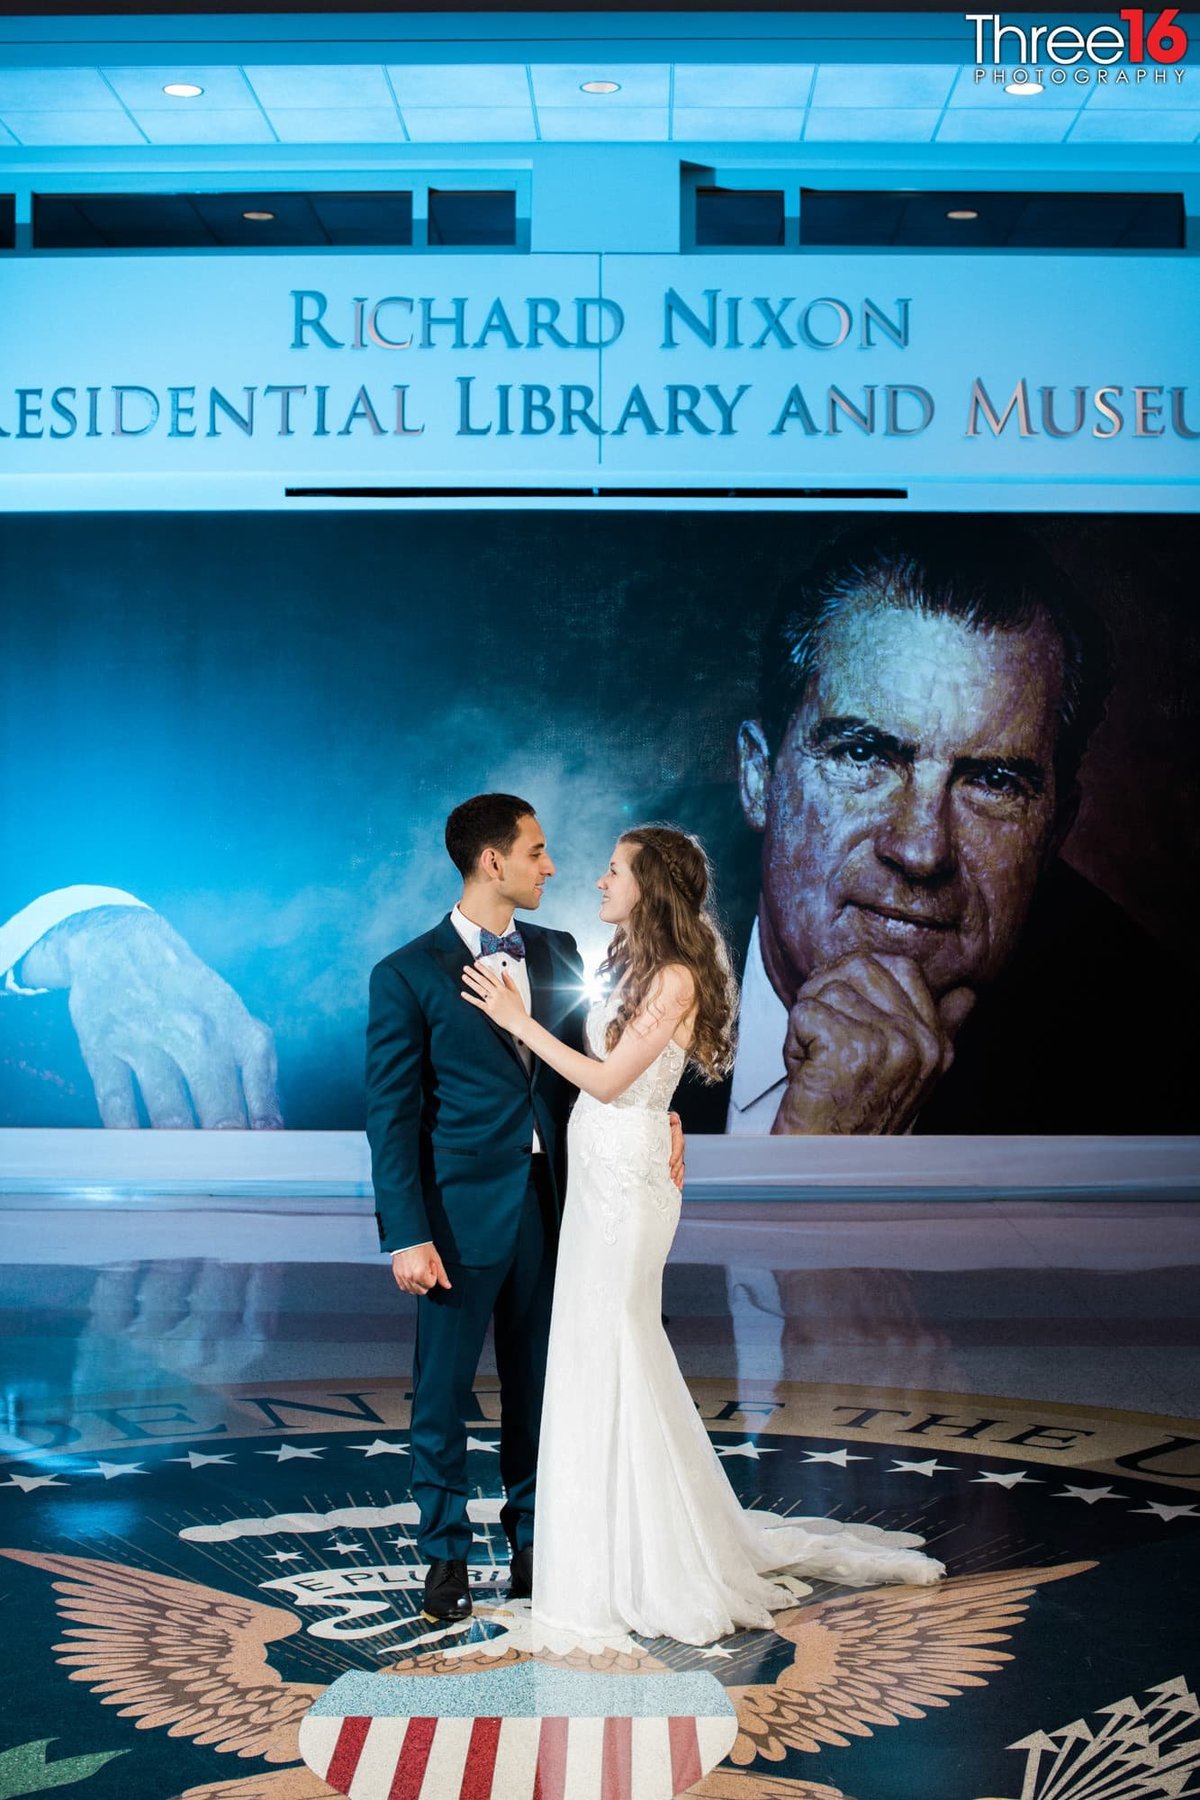 Newly married couple look at each other as they pose in front of the large wall mural of President Richard Nixon